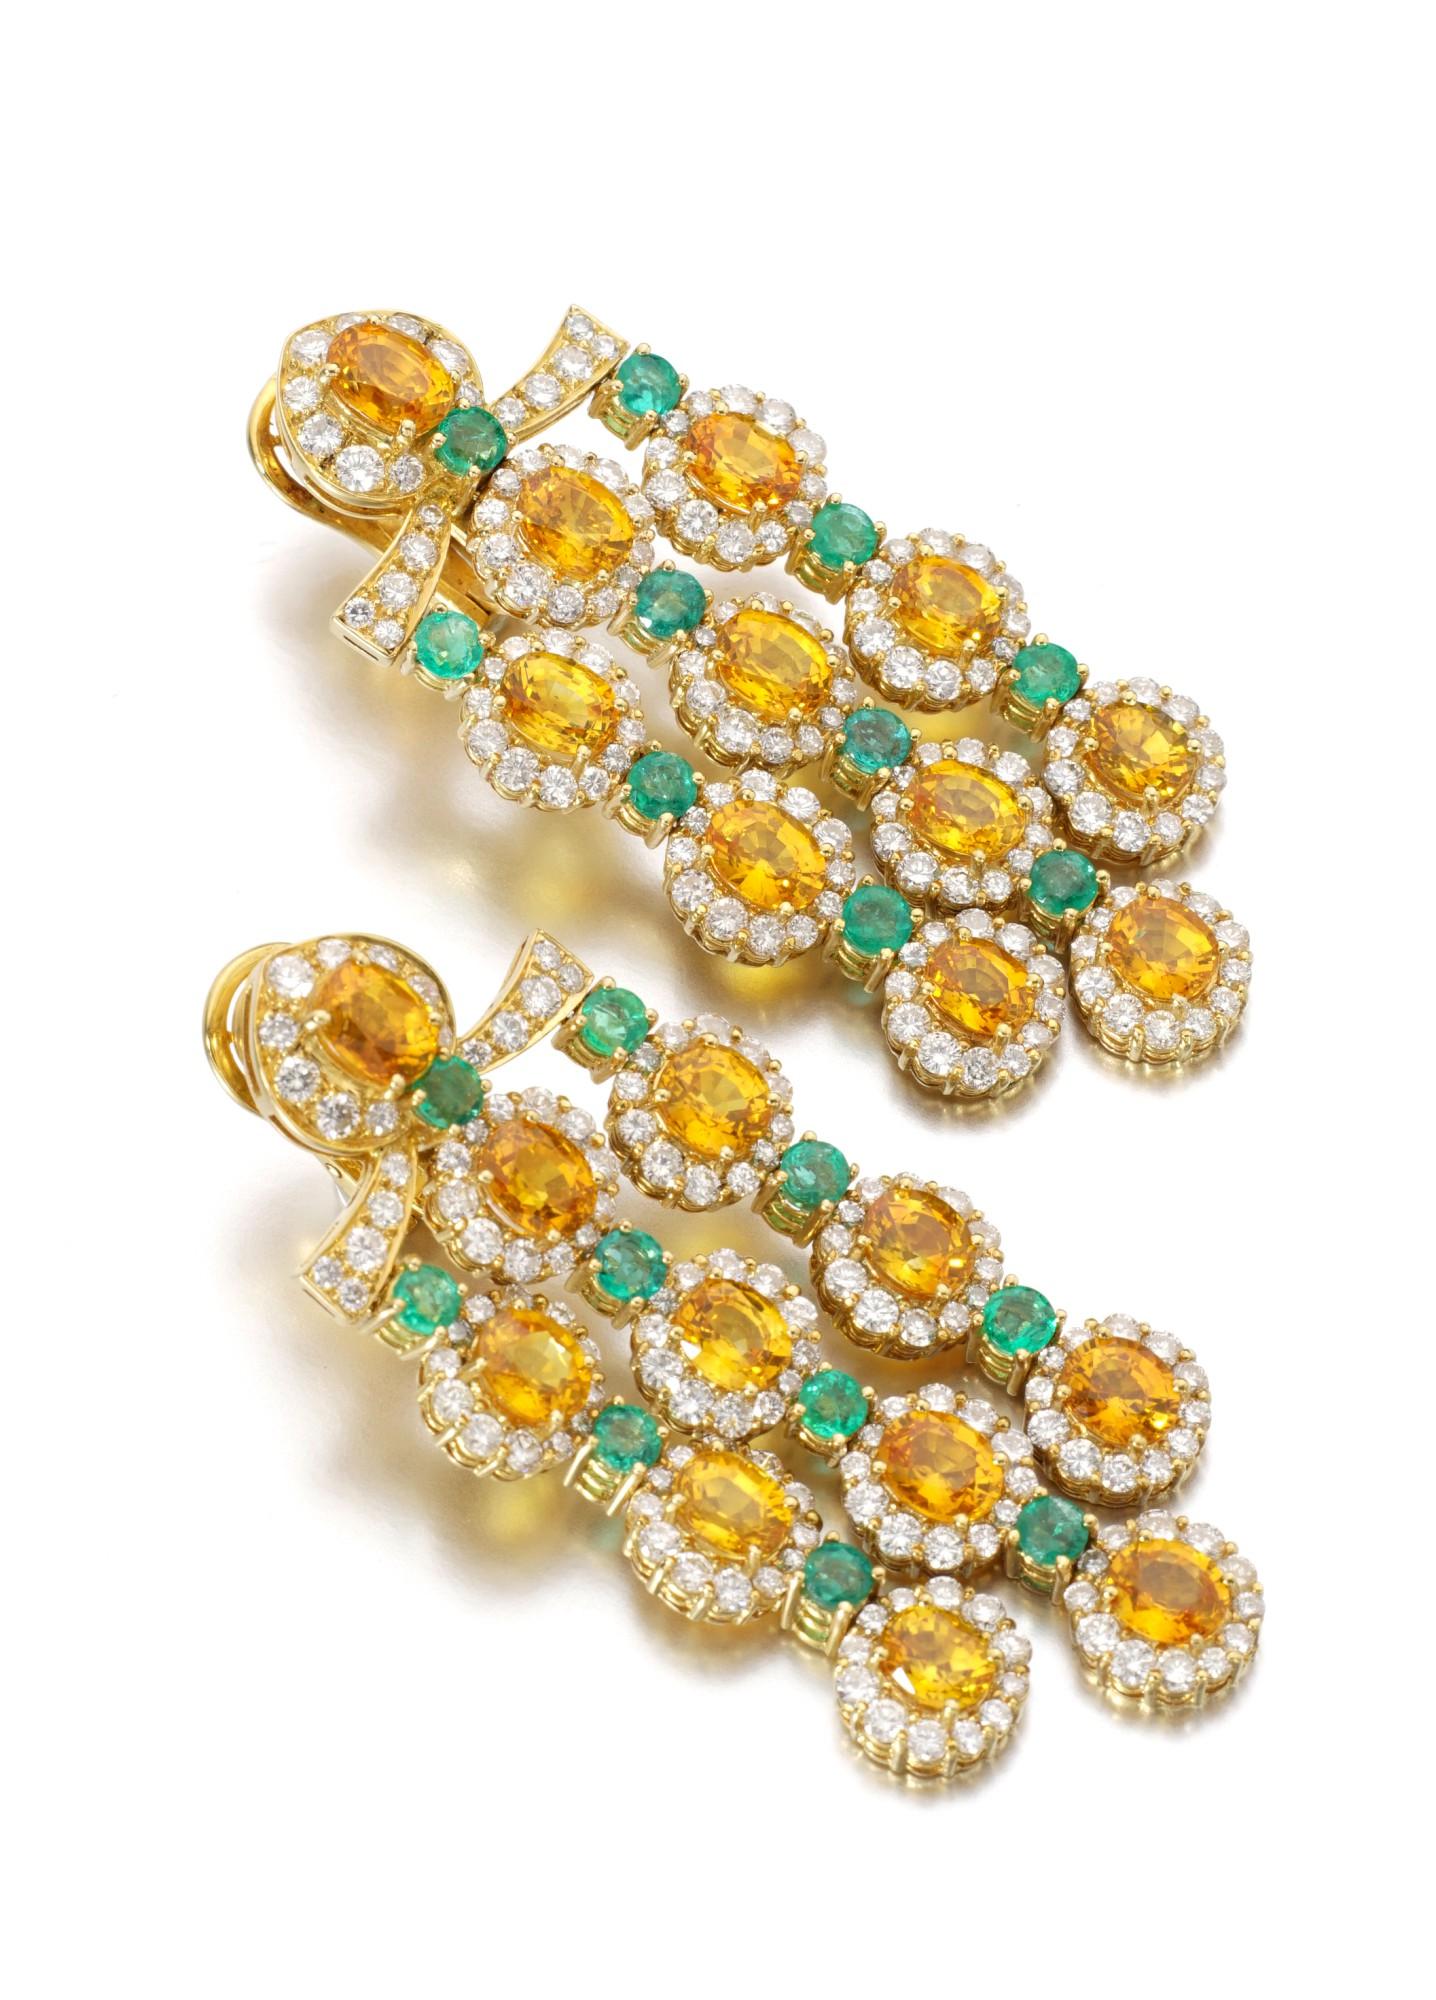 Stunning chandelier earrings set with circular-cut citrine and emeralds, and accented with brilliant-cut diamonds. With collapsible post and clip fittings.